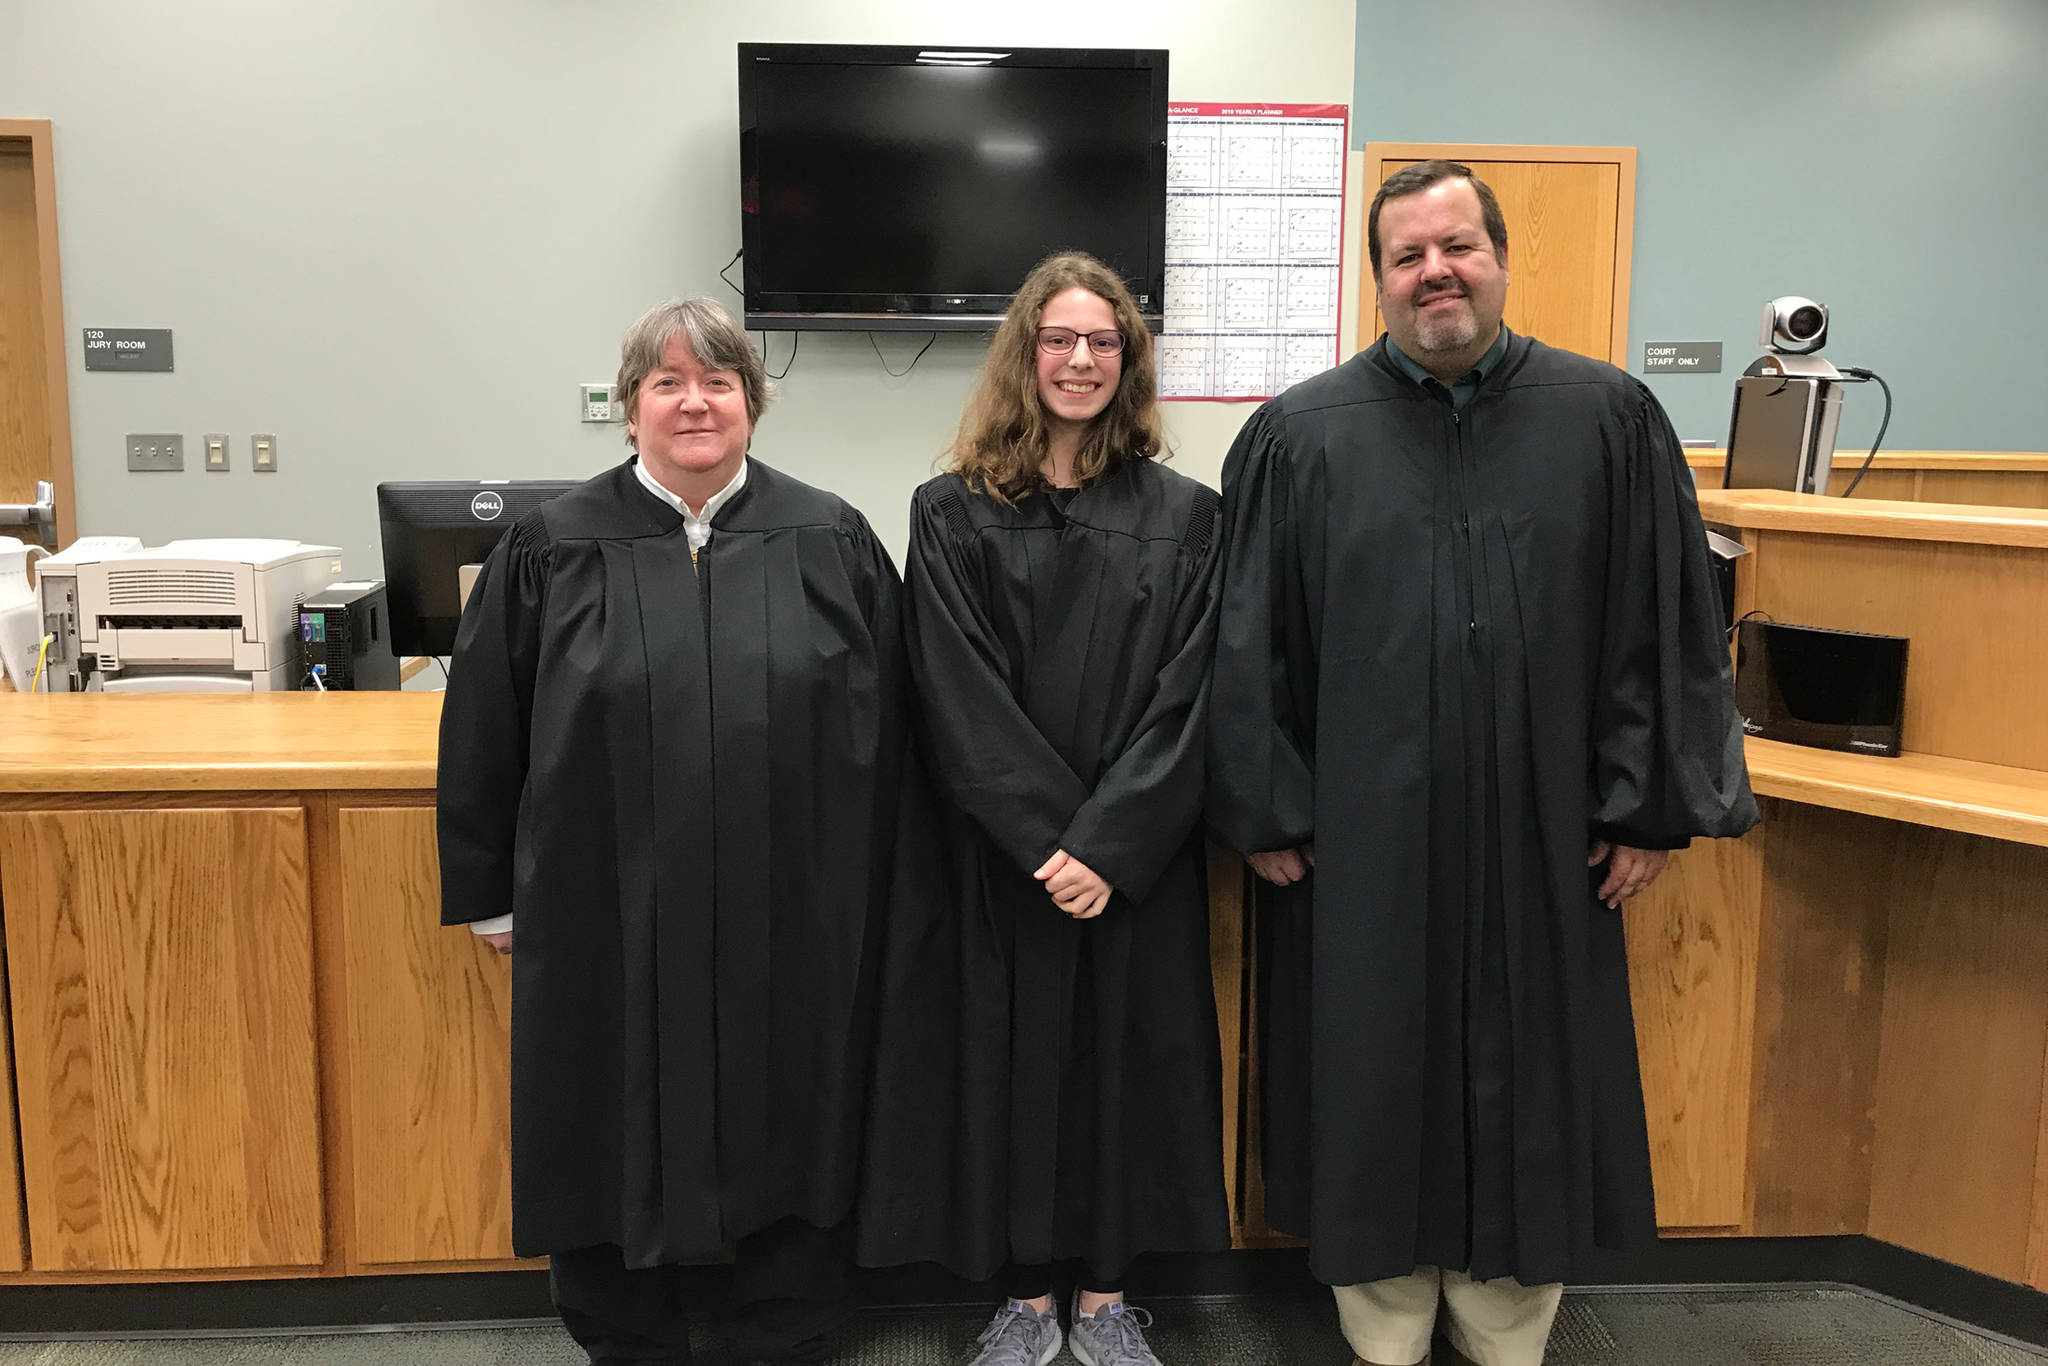 District Court Judge Margaret Murphy (left) and Superior Court Judge is Jason Gist (right) celebrate Rainey Sundheim during a Kenai Peninsula Youth Court swearing-in ceremony on March 27, 2019 at the Homer Courthouse in Homer, Alaska. (Photo courtesy Becky Paul)